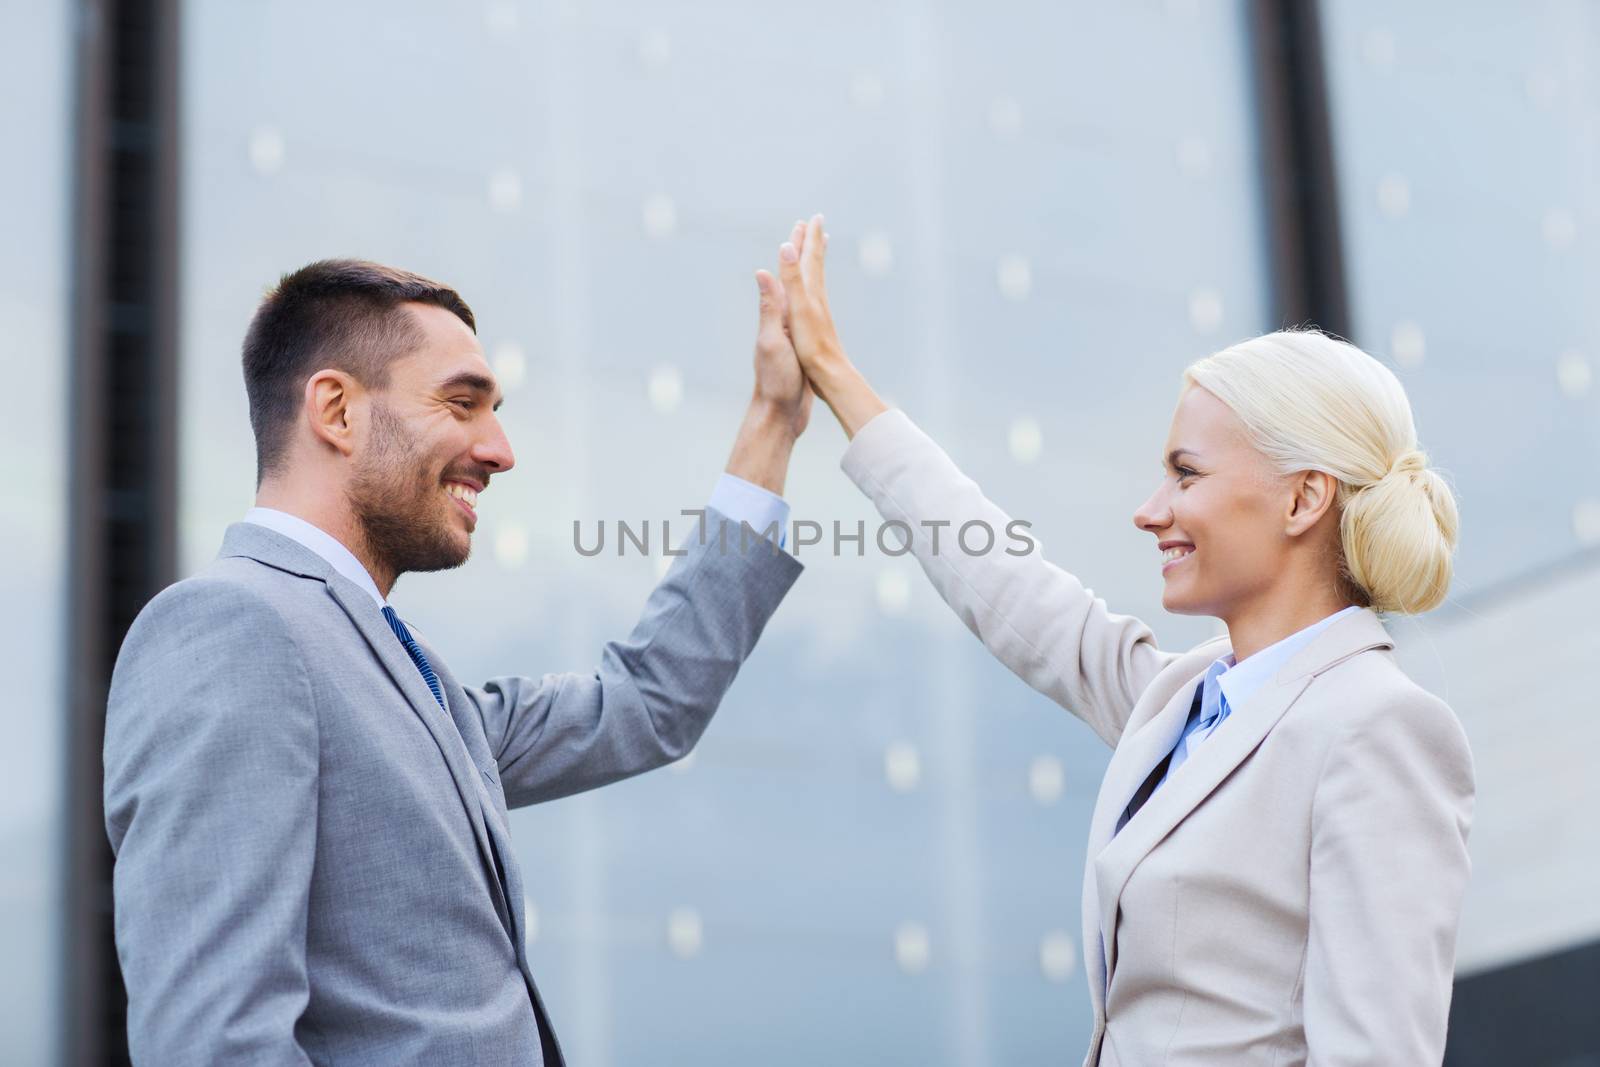 business, partnership, success, gesture and people concept - smiling businessman and businesswoman standing over office building